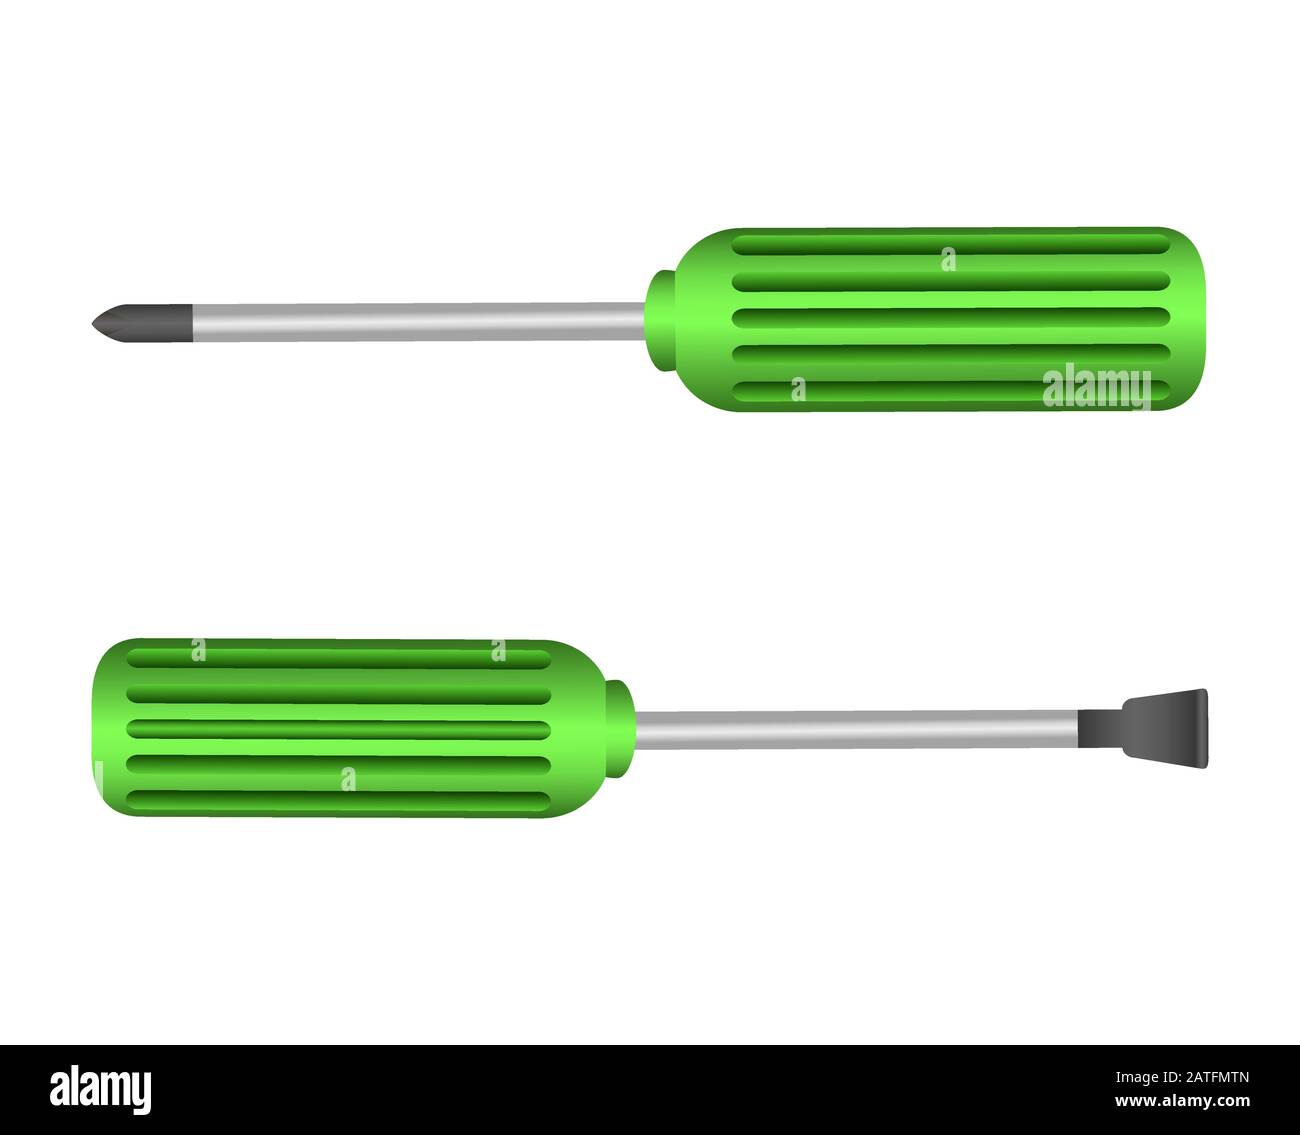 Different types of screwdrivers set on white background. Isolated realistic vector image Stock Vector